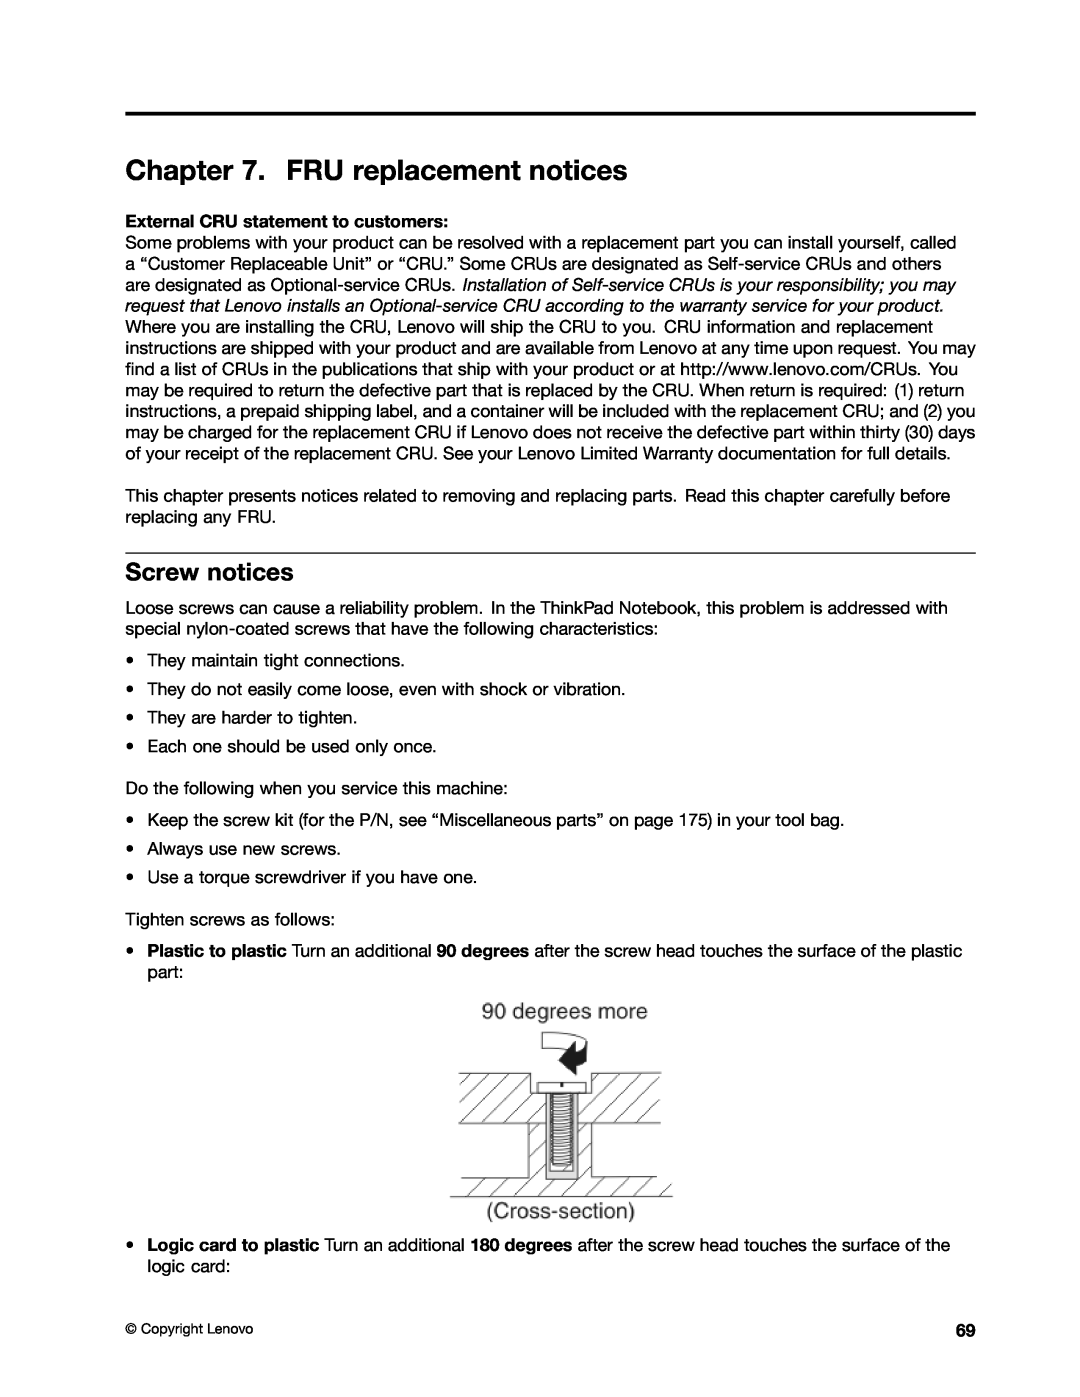 IBM T400S, T410SI manual FRU replacement notices, Screw notices, External CRU statement to customers 